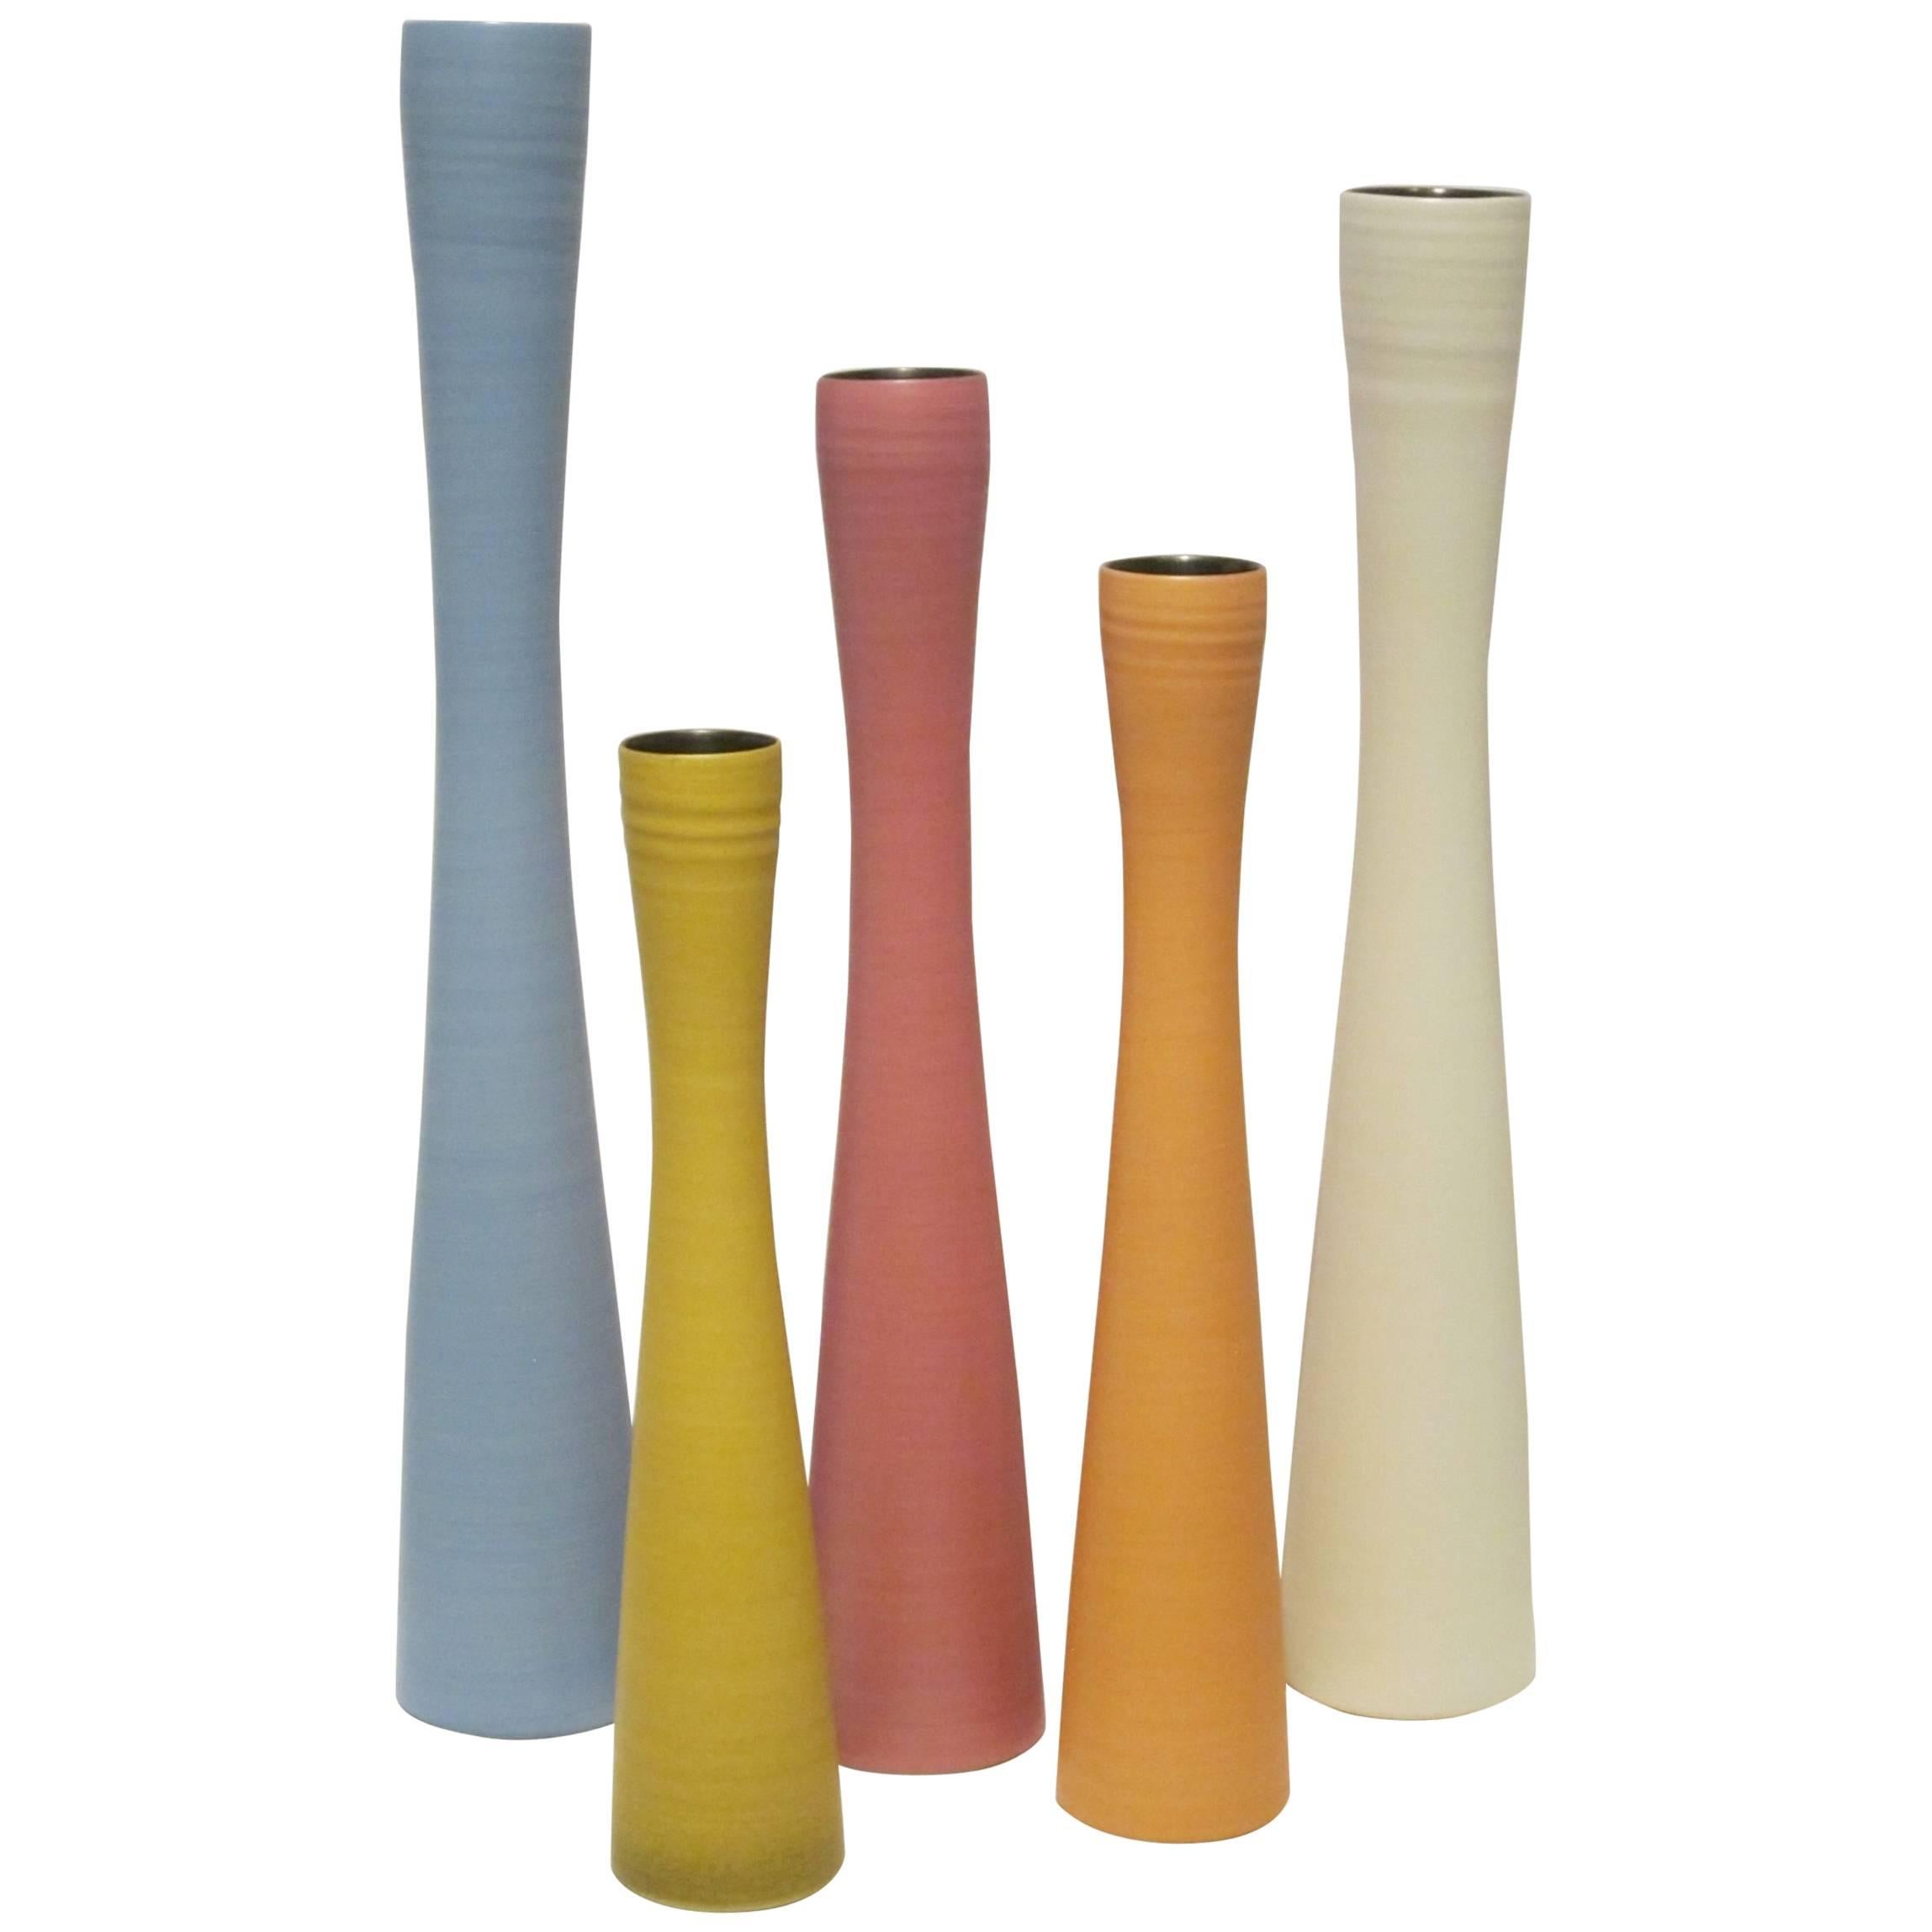 Contemporary Italian collection of hand made fine ceramic slender shaped vases in five different sizes.
Color assortment changes within each delivery.
Can be custom ordered by size and color.
Additional photo shows full range of sizes.
Photo of XS